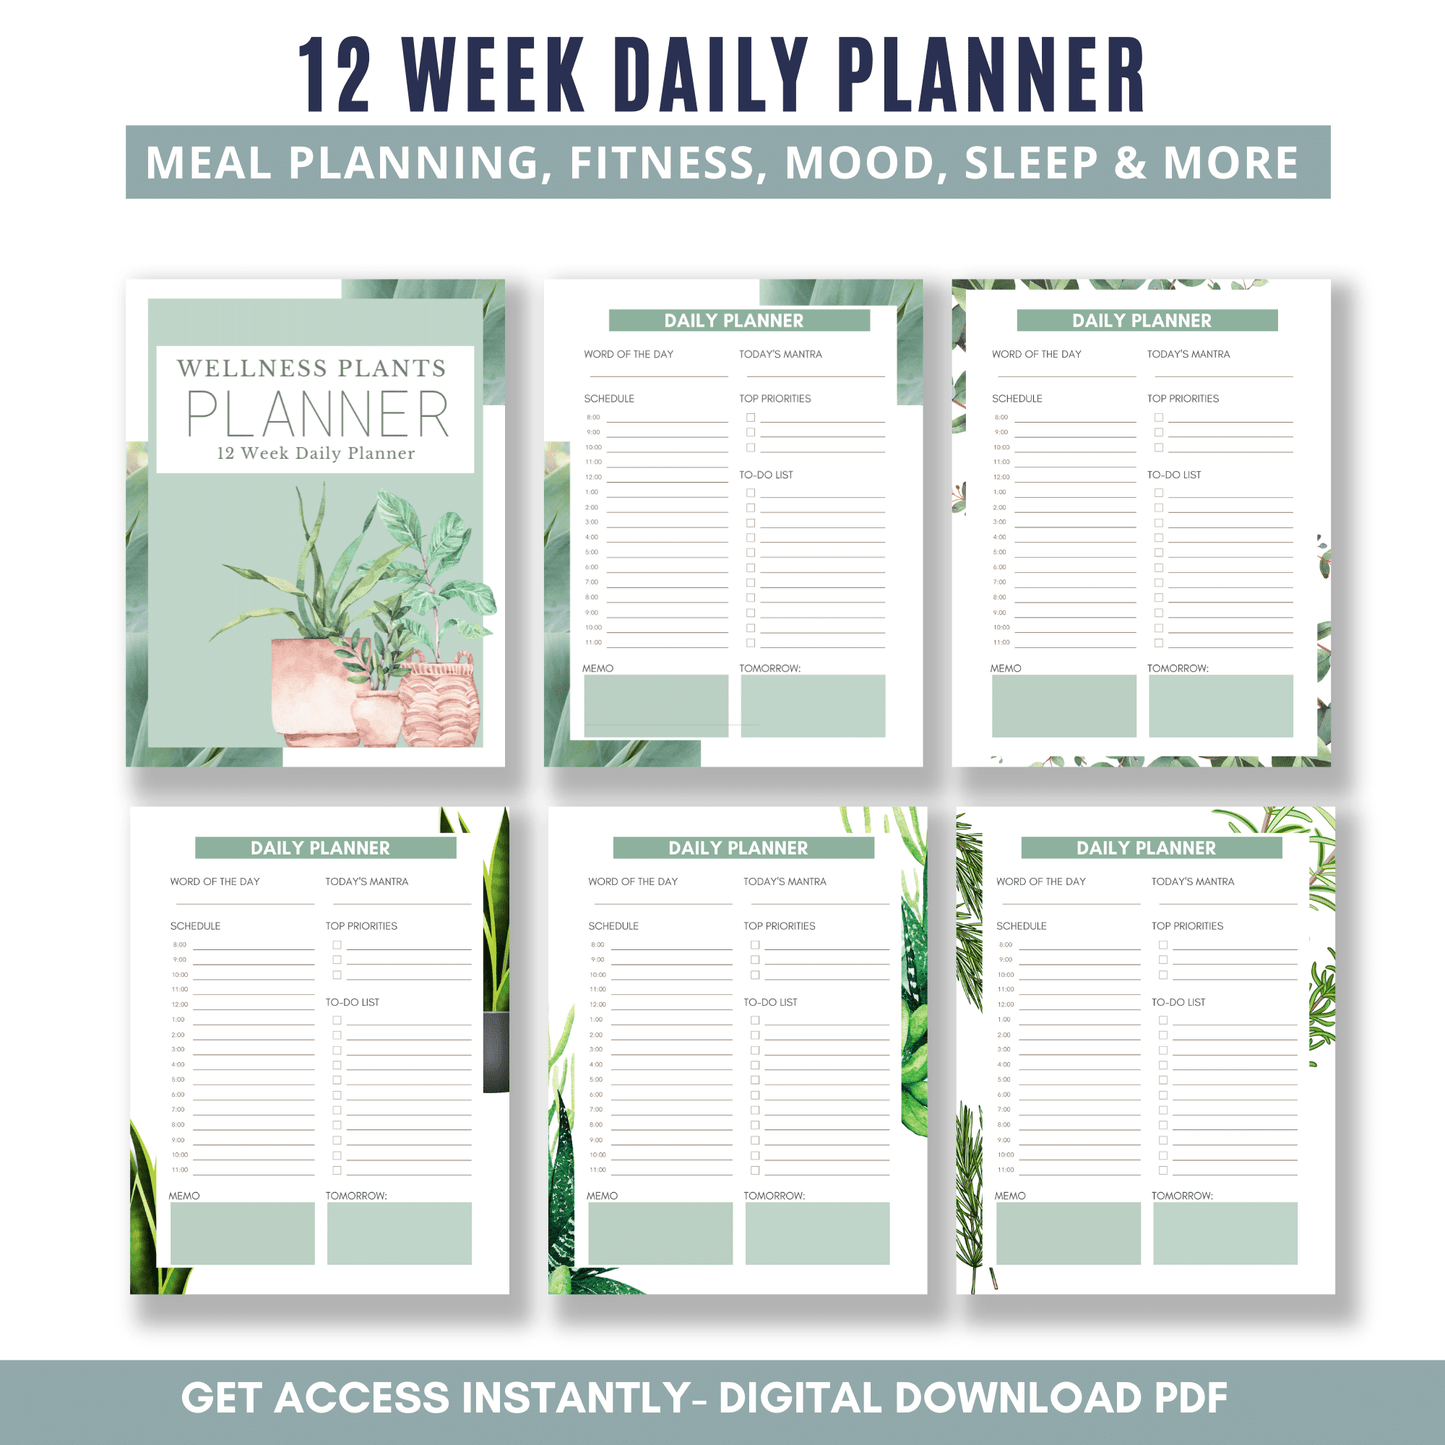 12 Week Daily Planner - Wellness Plants - White Background